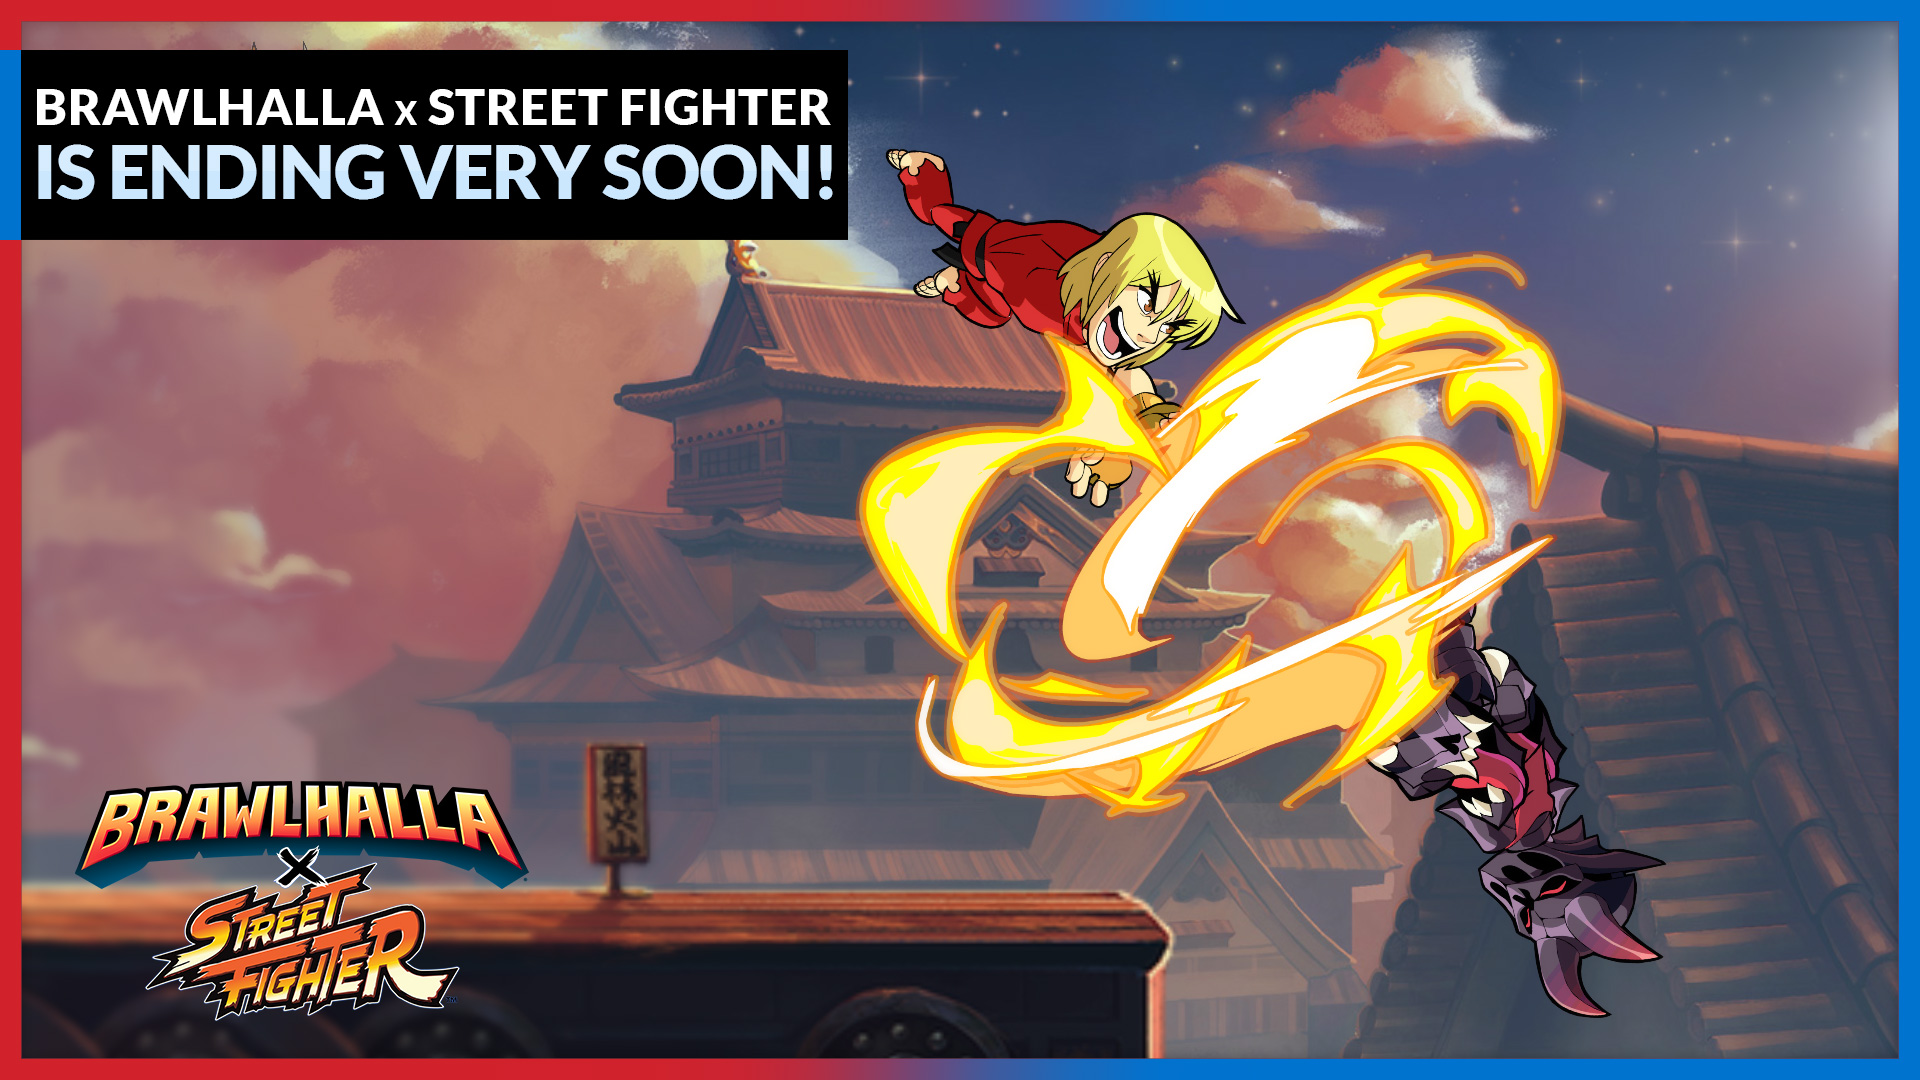 The Brawlhalla x Street Fighter Part 2 Celebrations End Soon! 